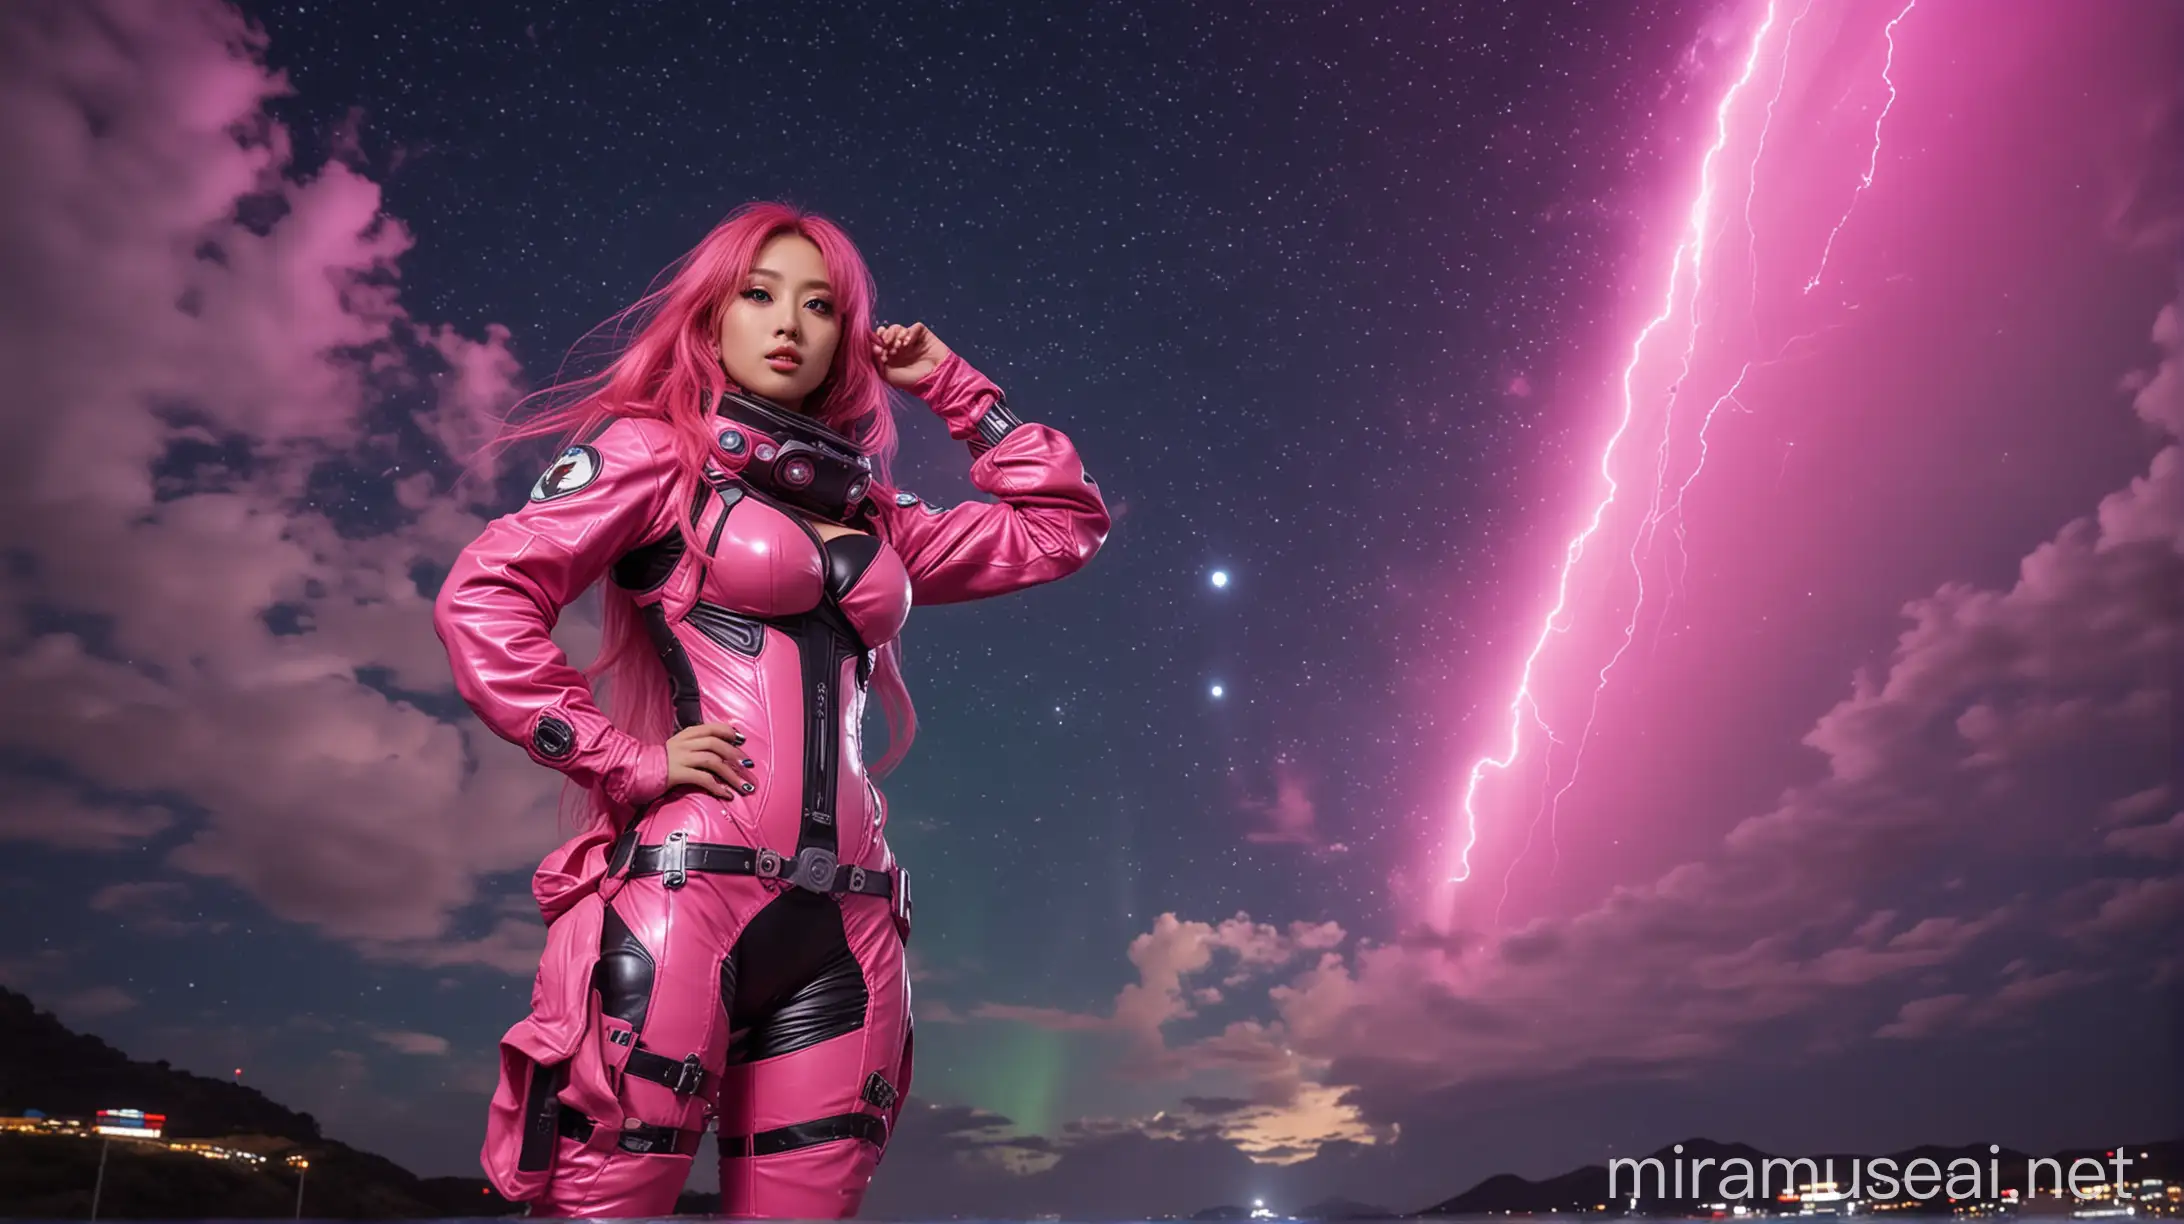 in the left side of the picture japan girl, sexy makeup, big eyes and fat lips, slim, long hair, wild hair, full body, fitness model, big boobs, wide hips, huge tits, tight spacesuit, high armored spacesuit, magenta spacesuit, neon lights of spacesuit, alien rocky planet with green sky, night sky, stars, planets, explosions and lightning in the sky